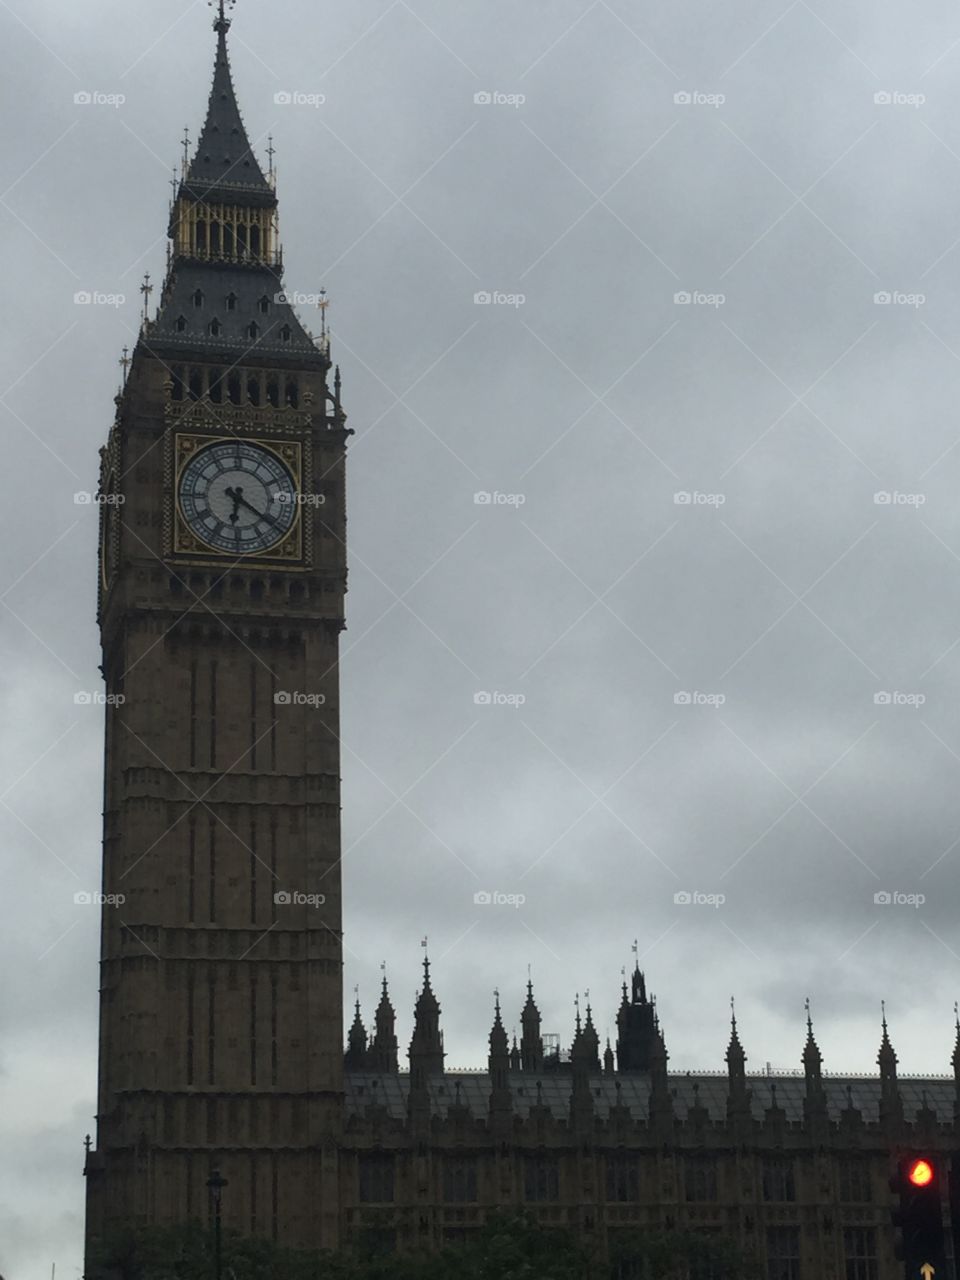 Big Ben . Such an amazing building in London, just a shame about the cloudy weather. But still s lovely sight. 